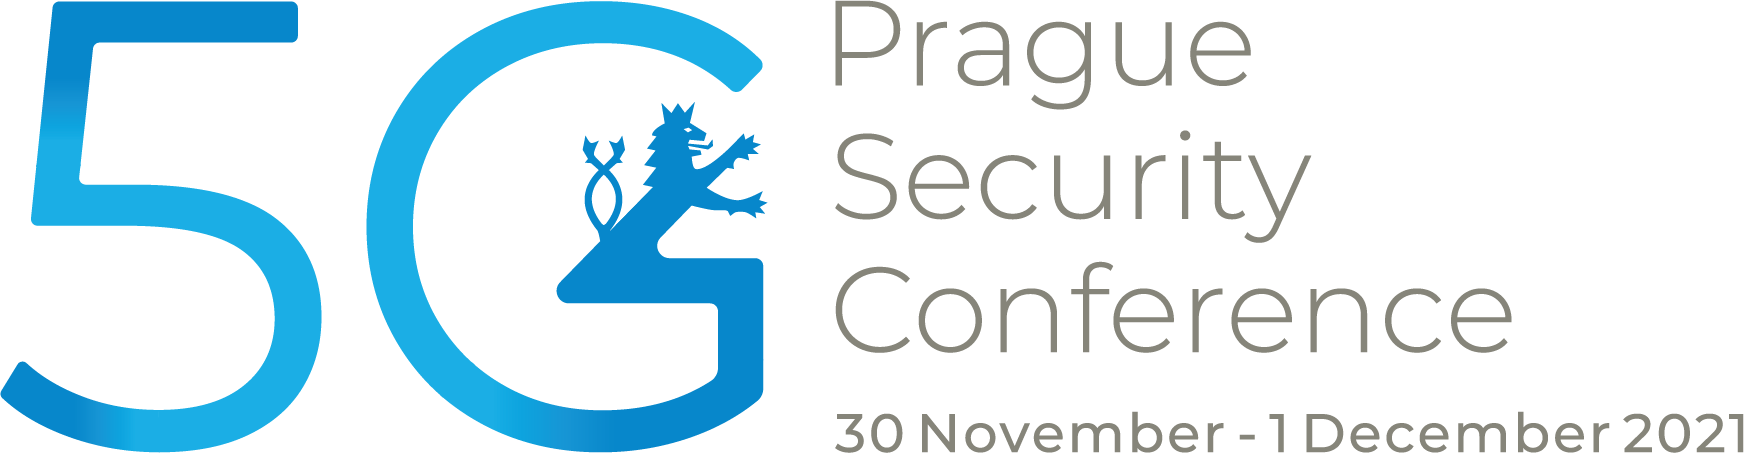 The Third Prague 5G Security Conference has ended